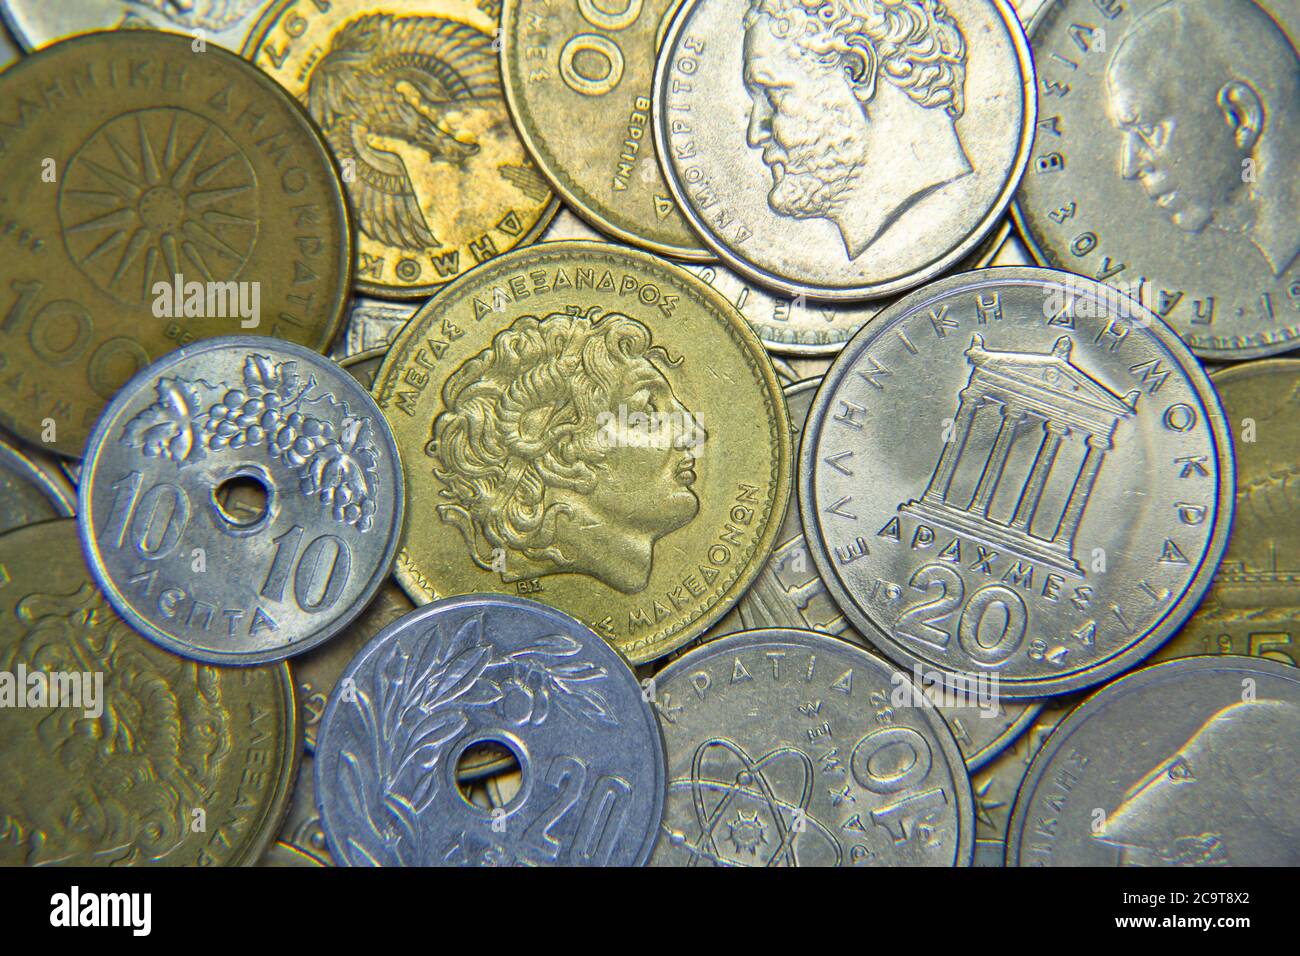 Huge pile of the greek coins Stock Photo